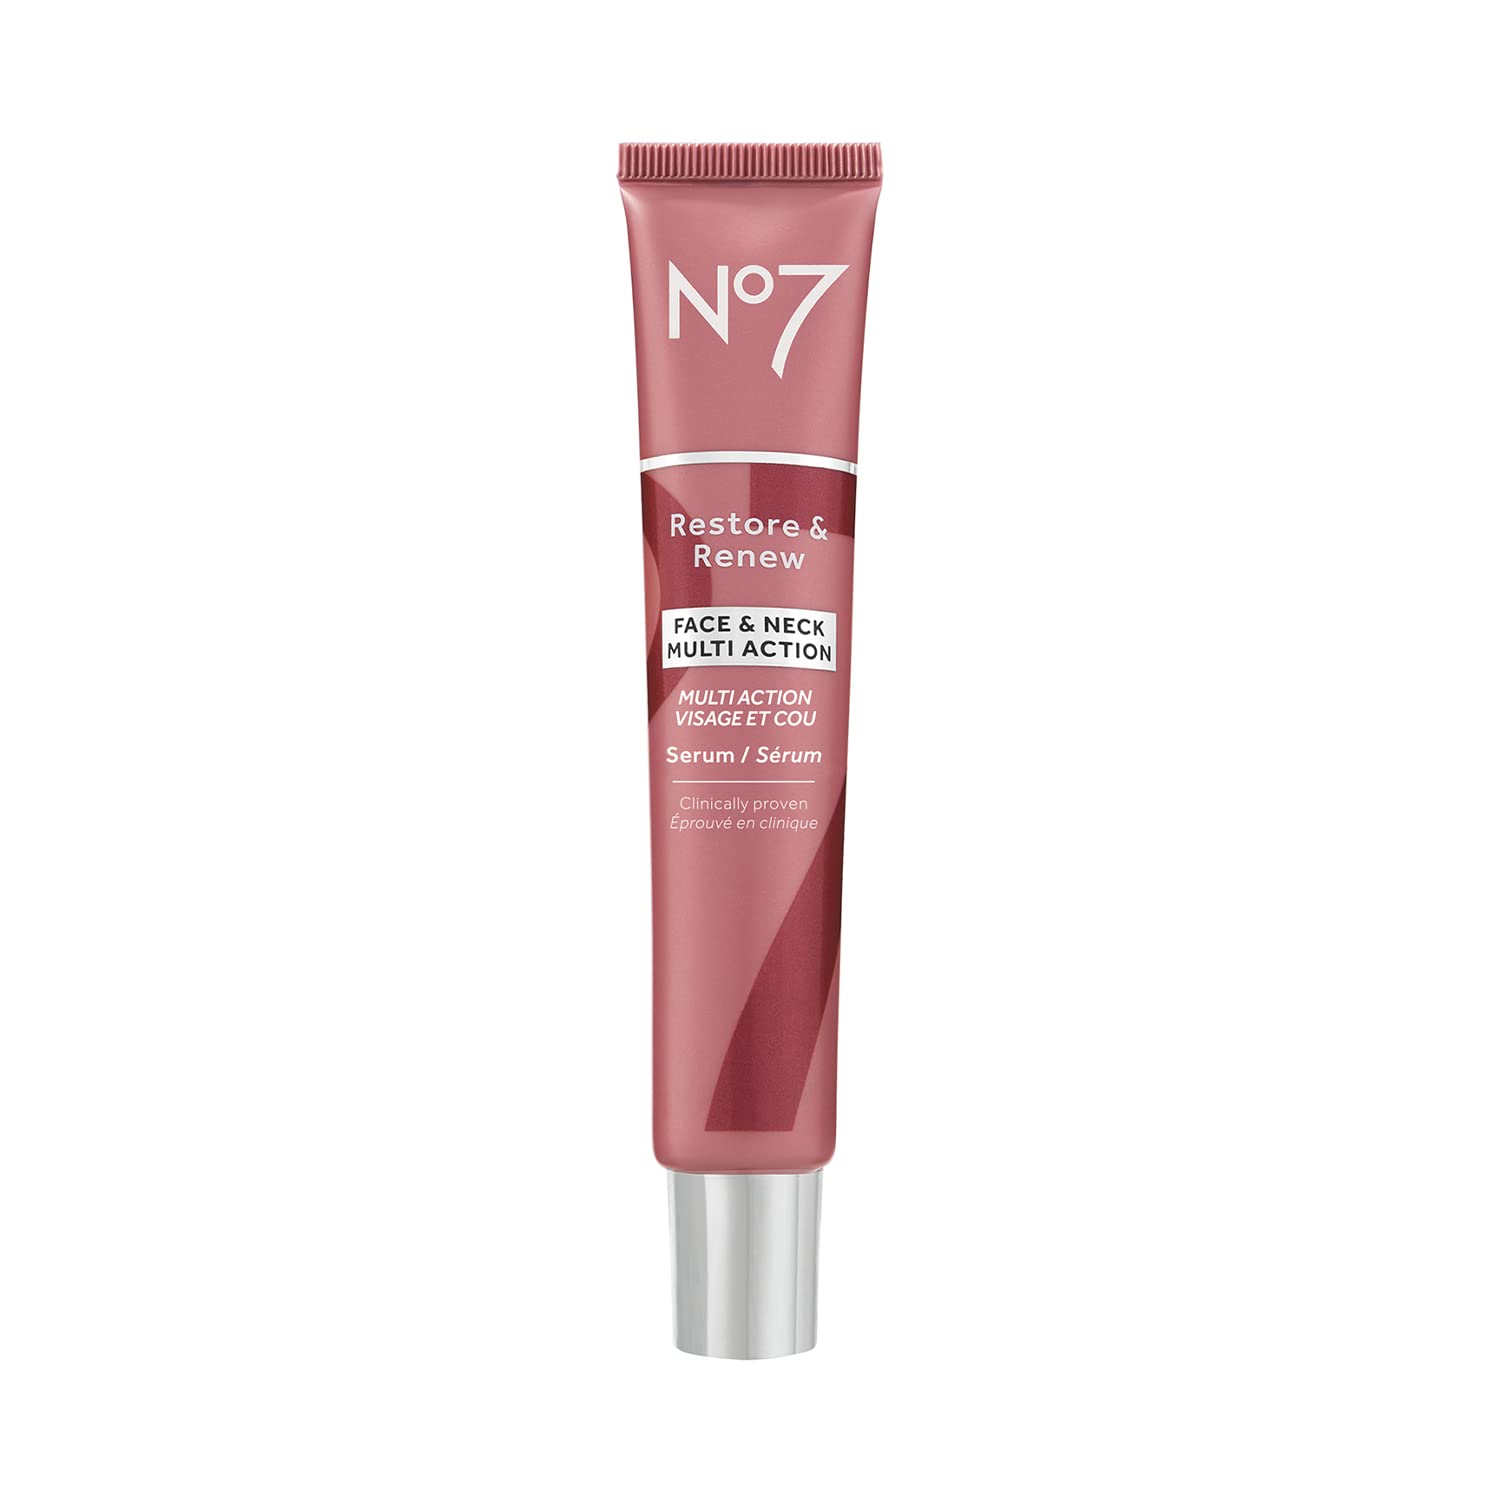 How to Rejuvenate Your Skin at Any Age with No7: The 15 Ways No7 Restore and Renew Serum Keeps Your Face Looking Youthful